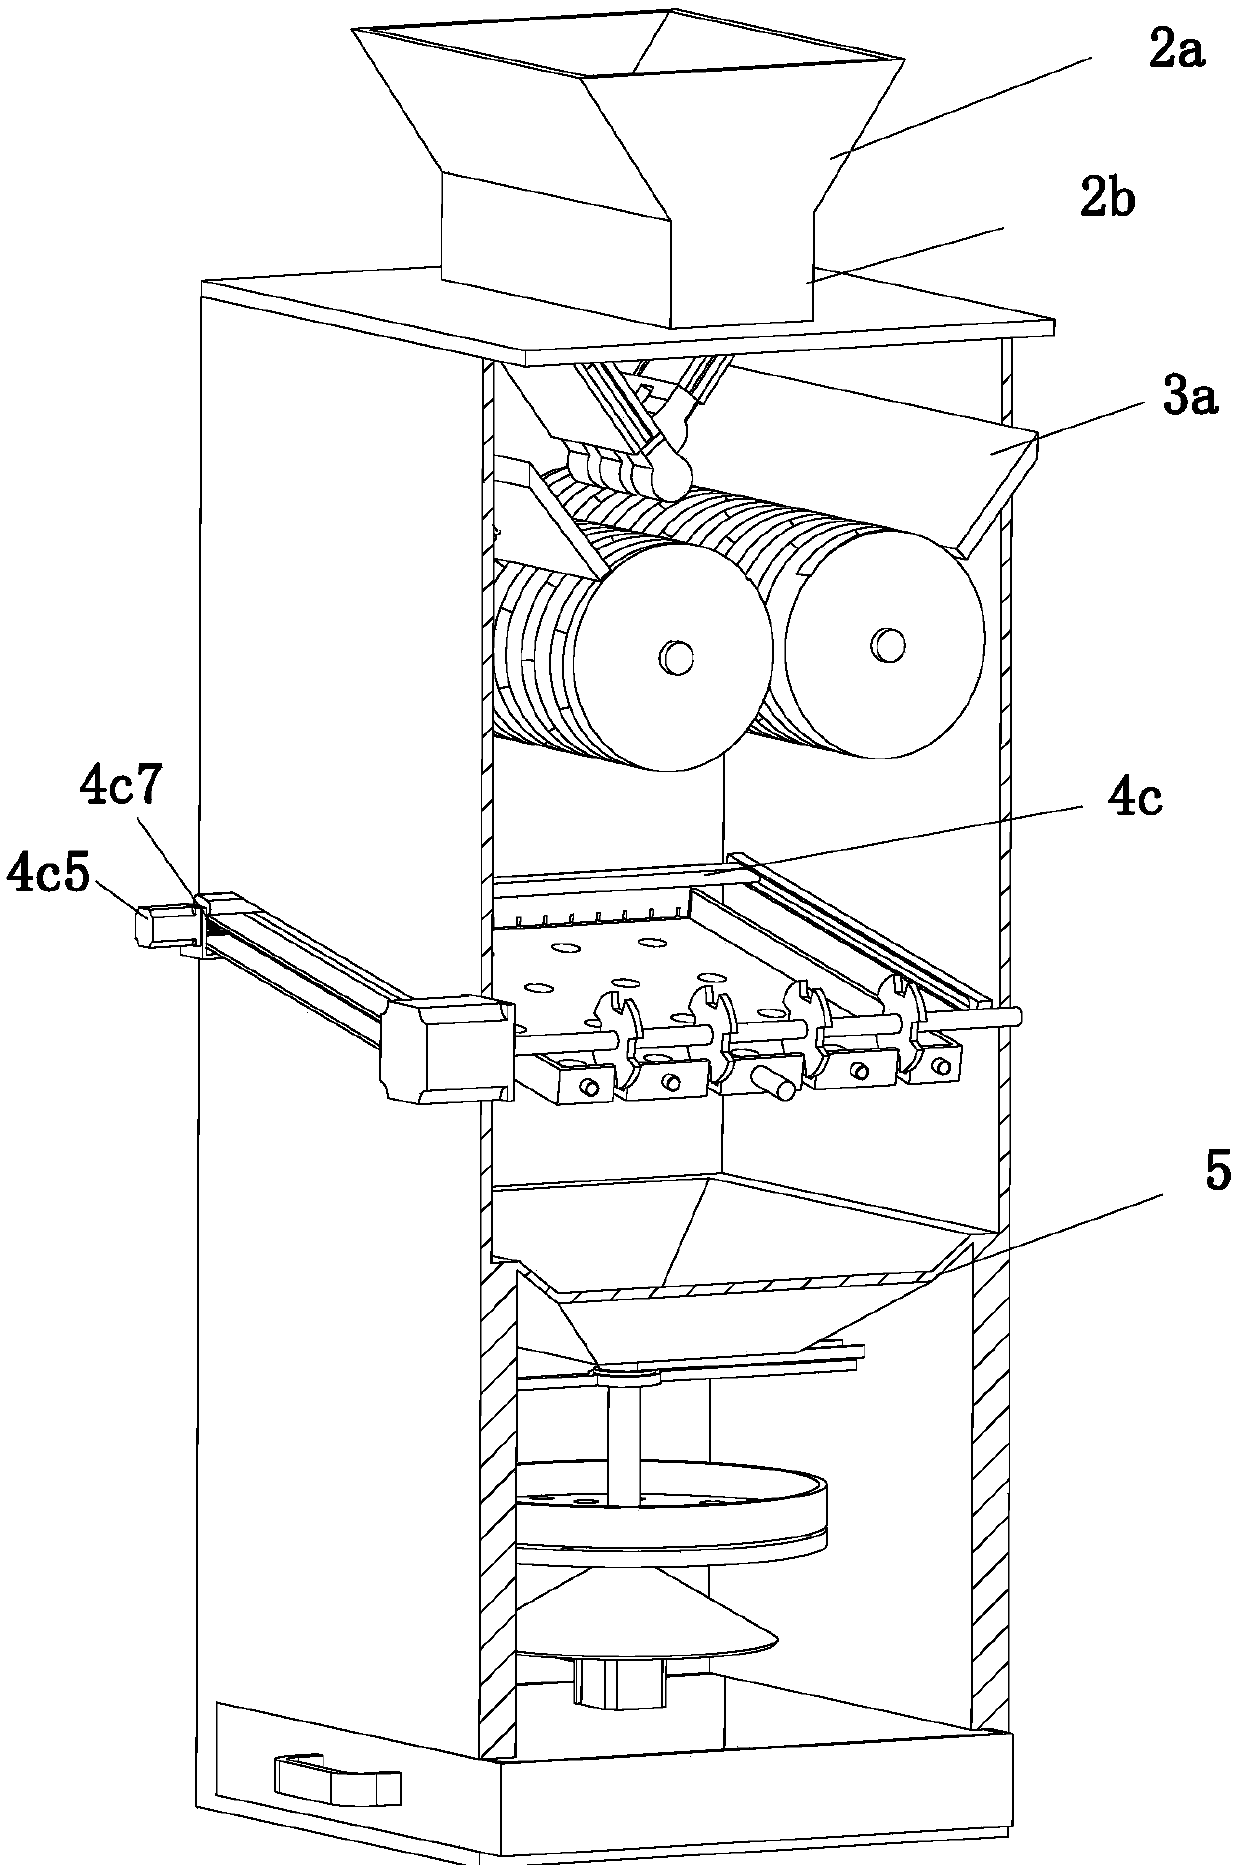 Medicine crushing and grinding mechanism